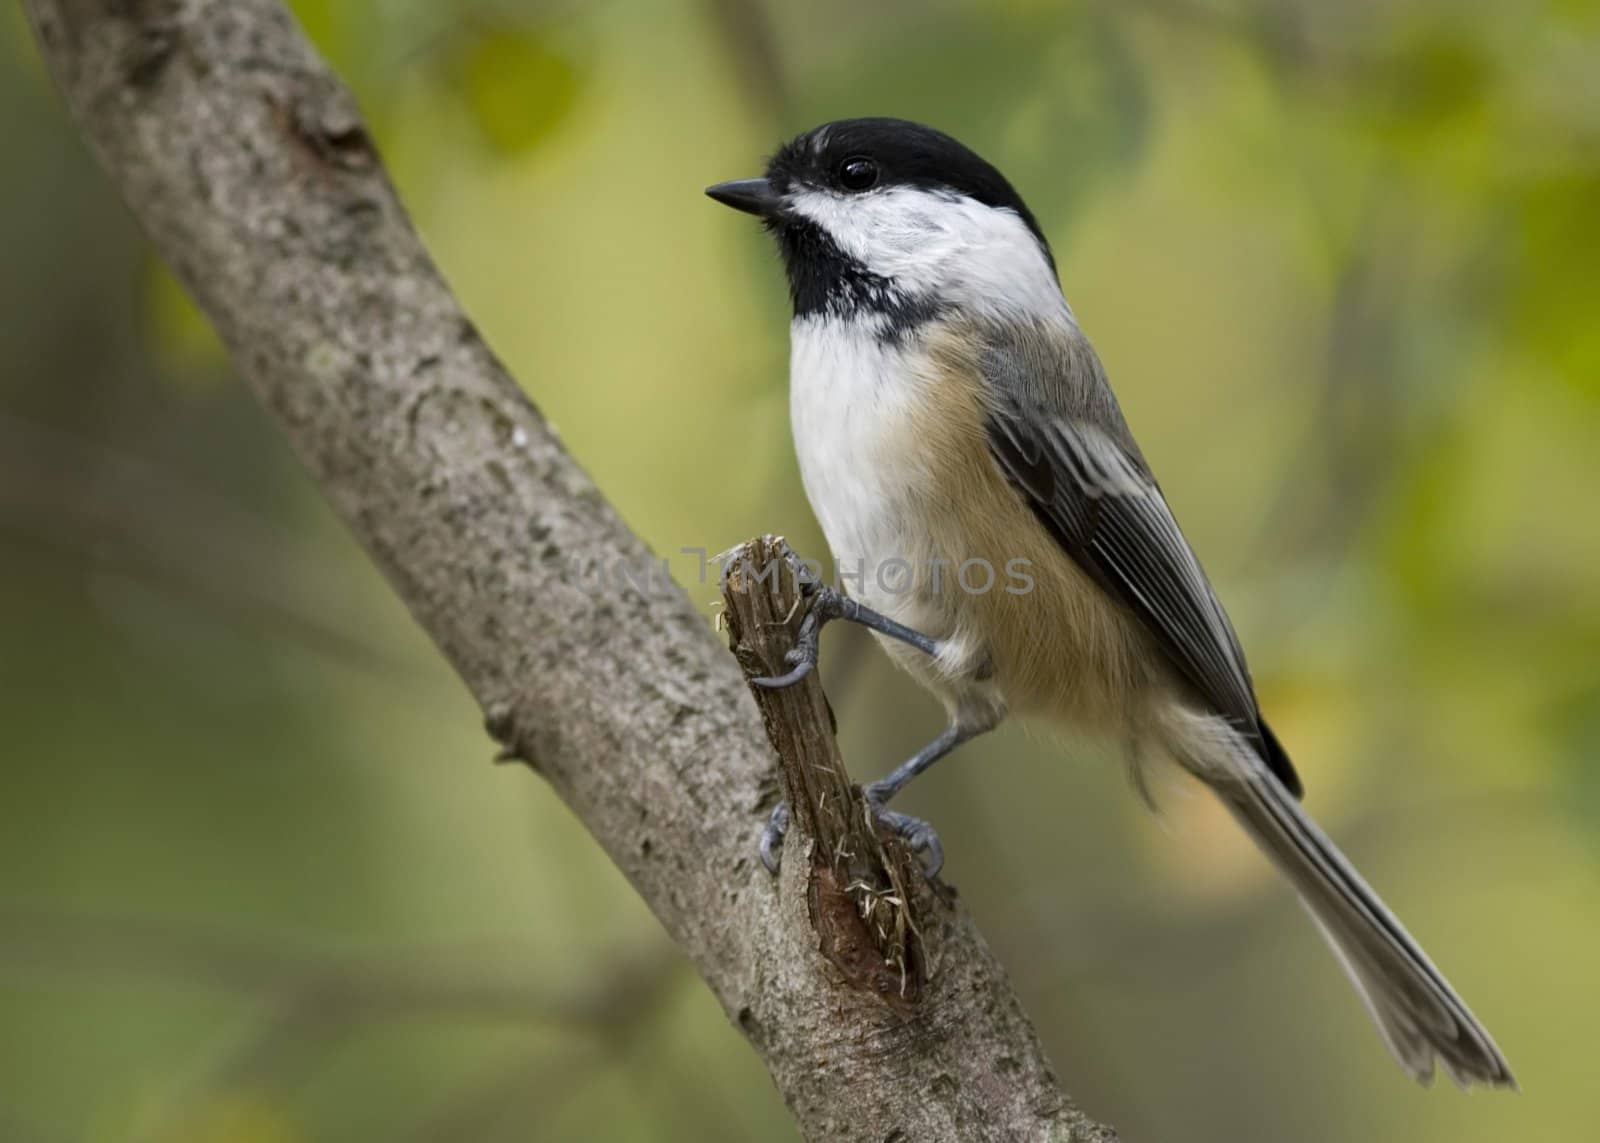 Black-capped chickadee perched on a branch.